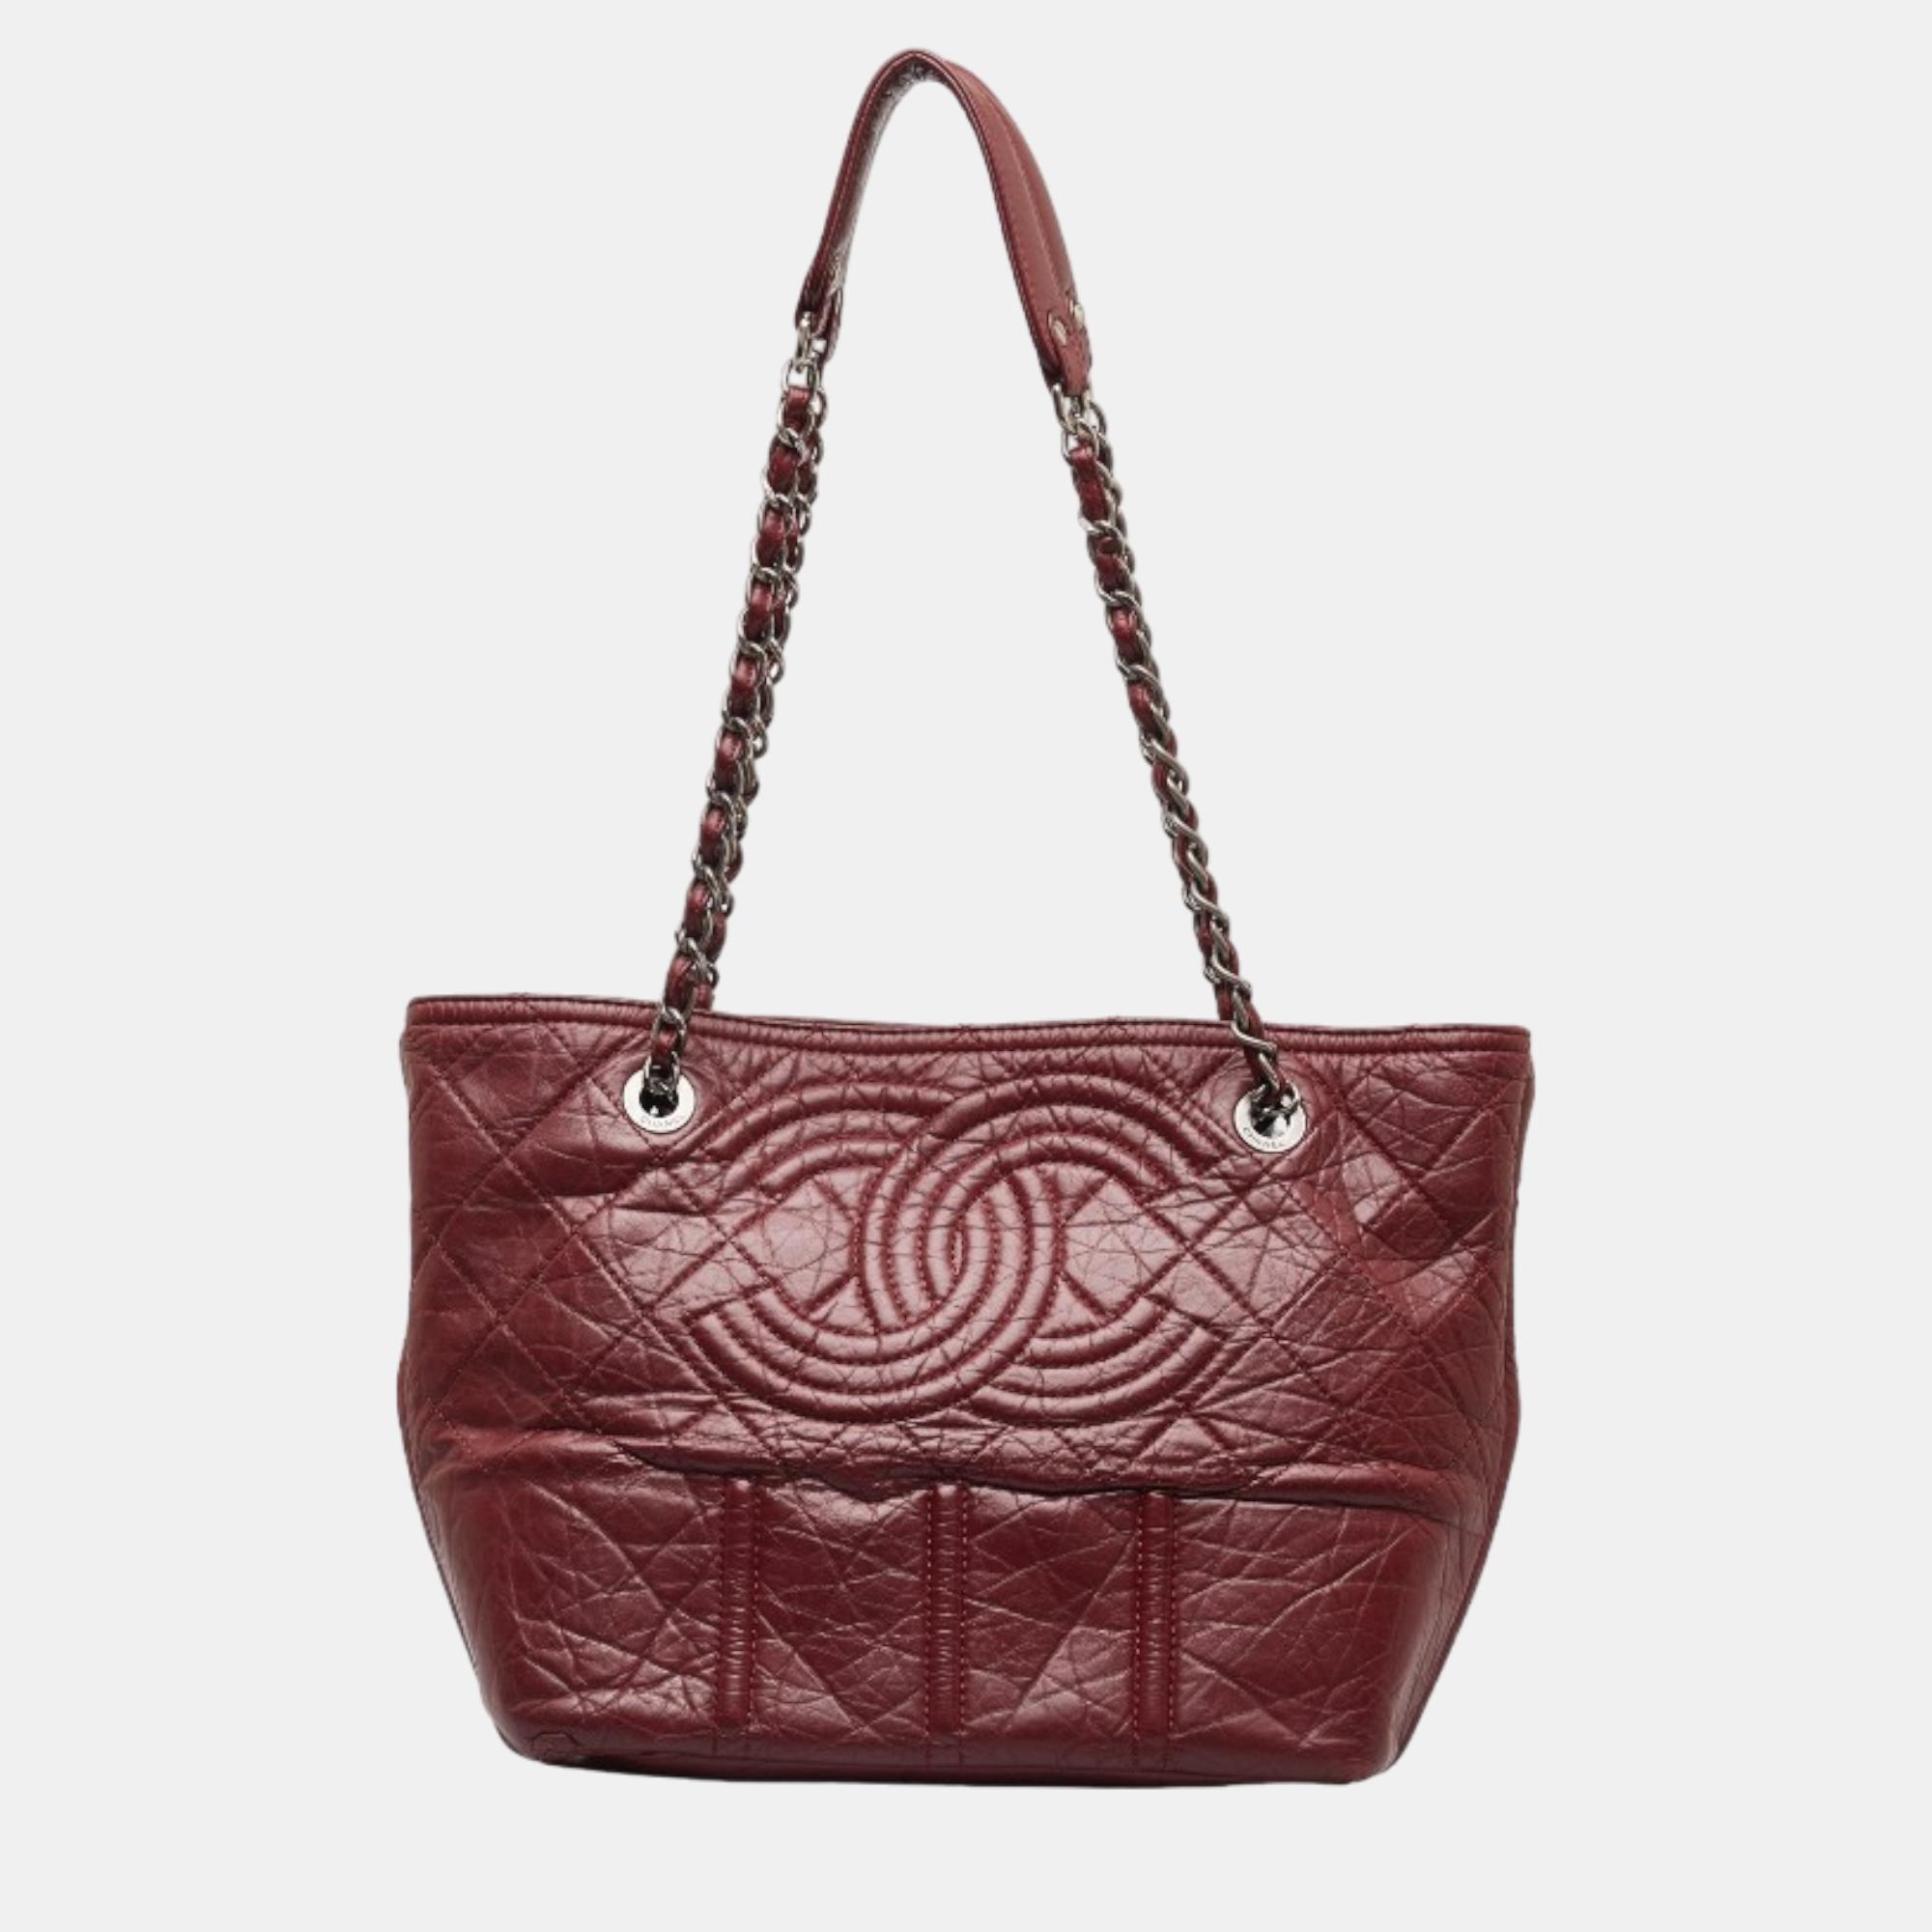 Pre-owned Chanel Red Leather Aged Lambskin Shopping Tote